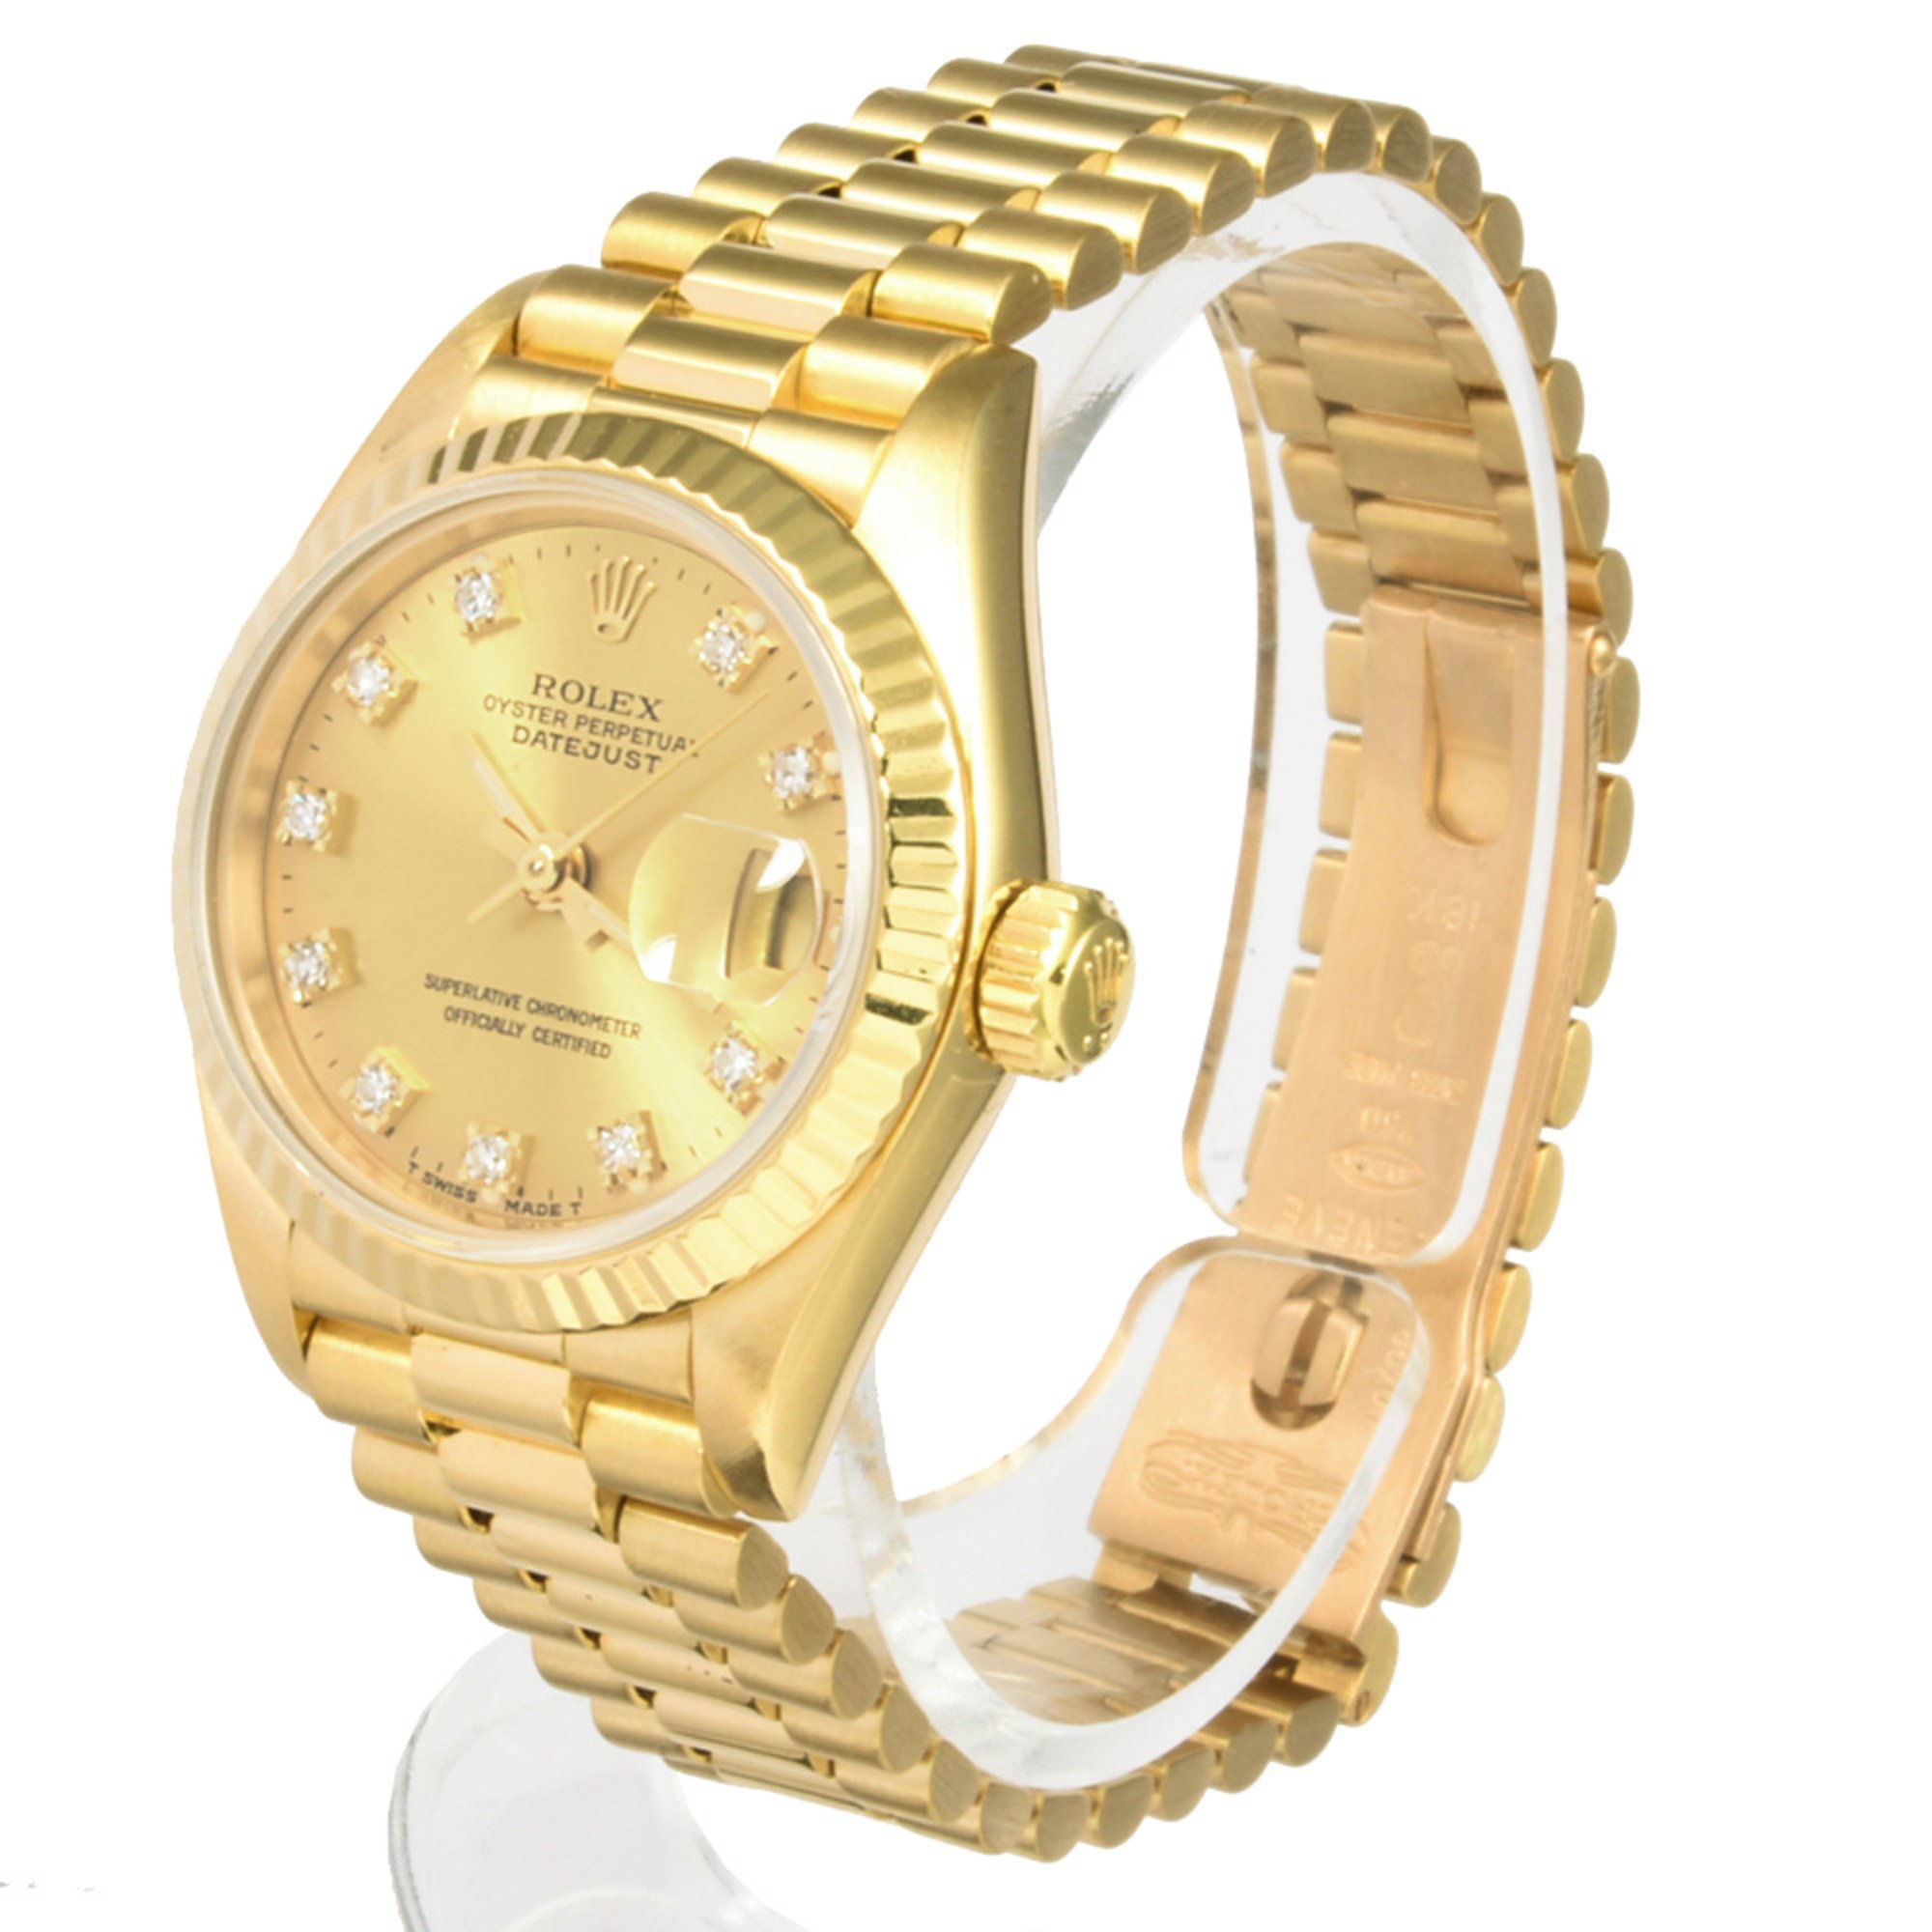 Rolex ROLEX 69178G Datejust 10P Diamond R Series (manufactured in 1987) Automatic Wristwatch Champagne Dial K18 Solid Gold Ladies